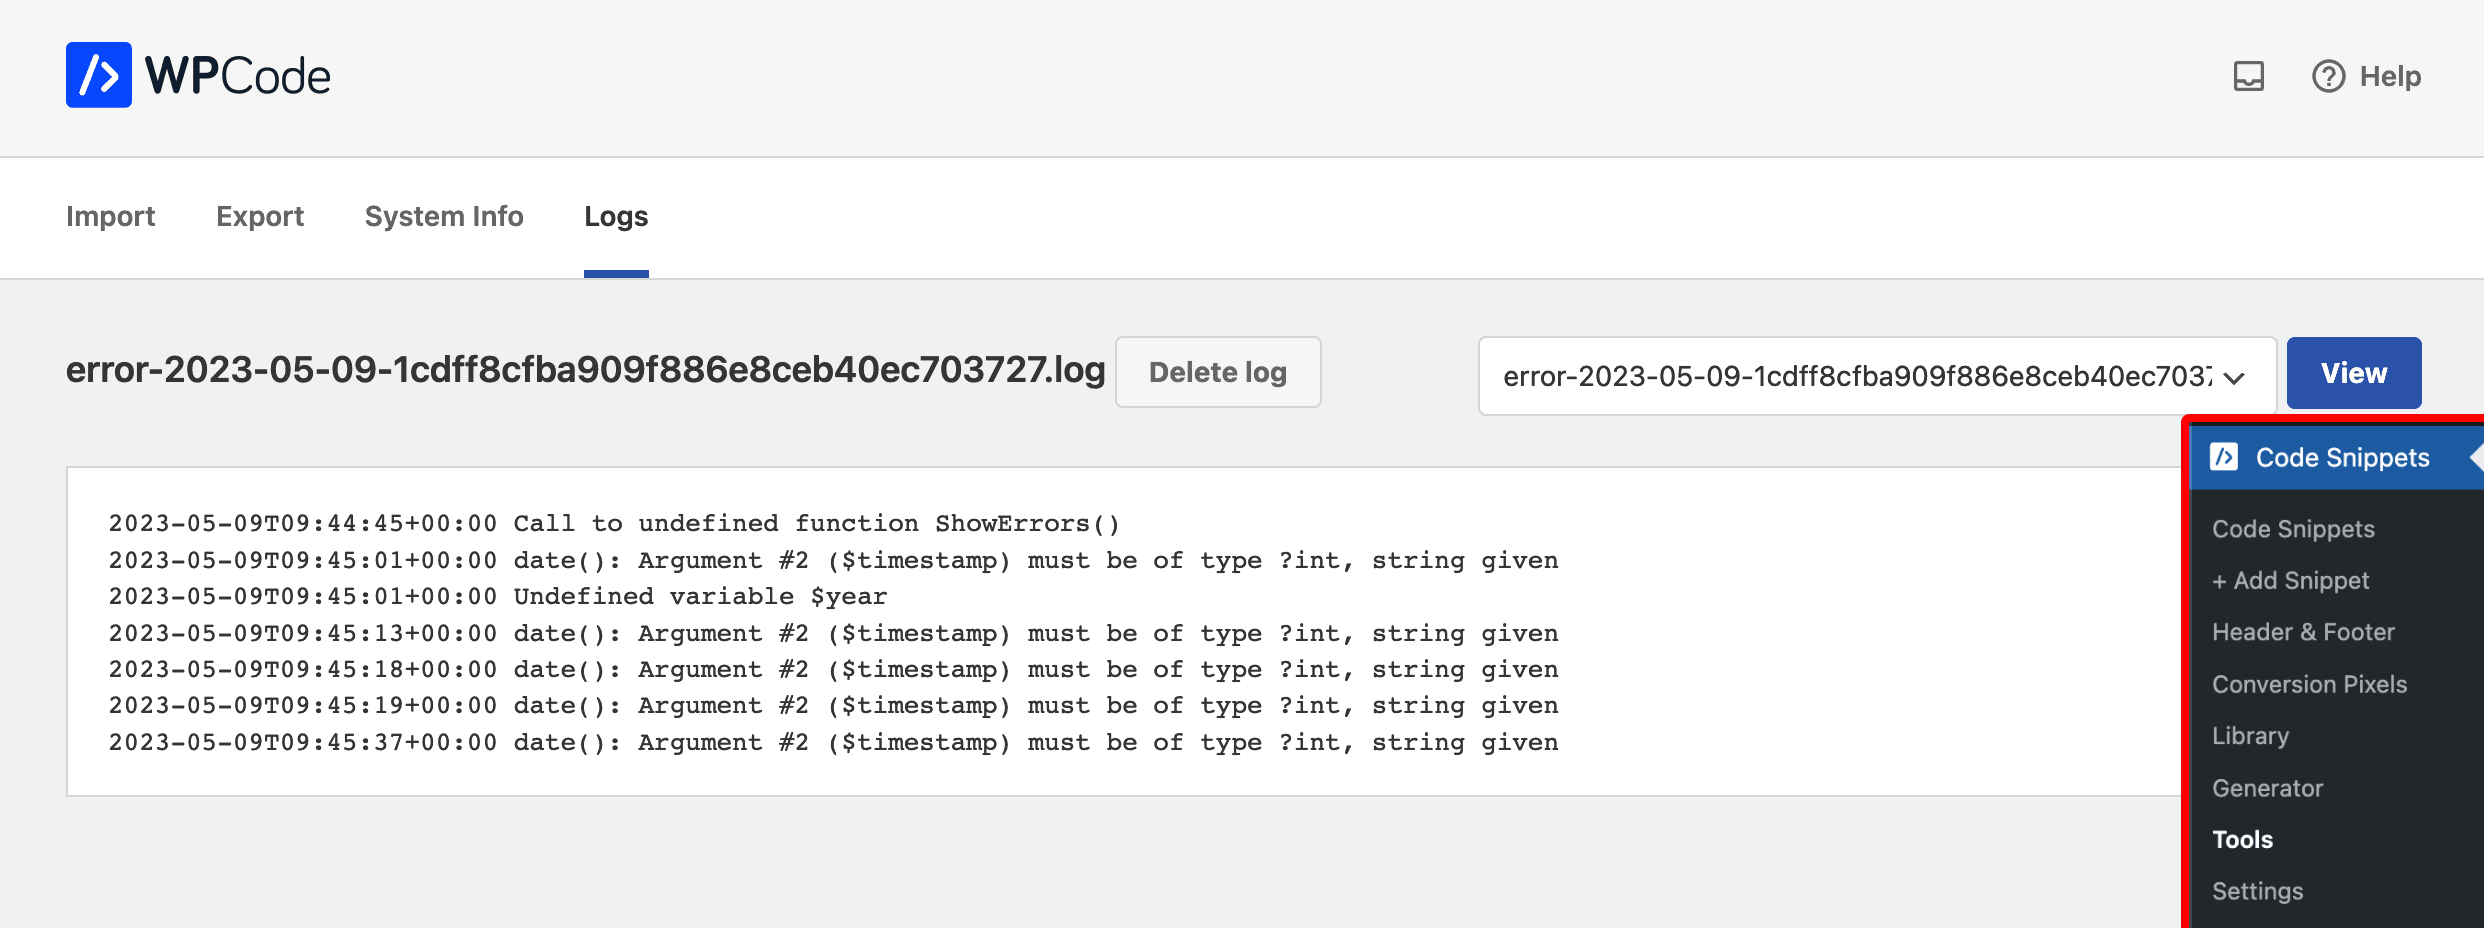 View an error log in the WPCode Tools area